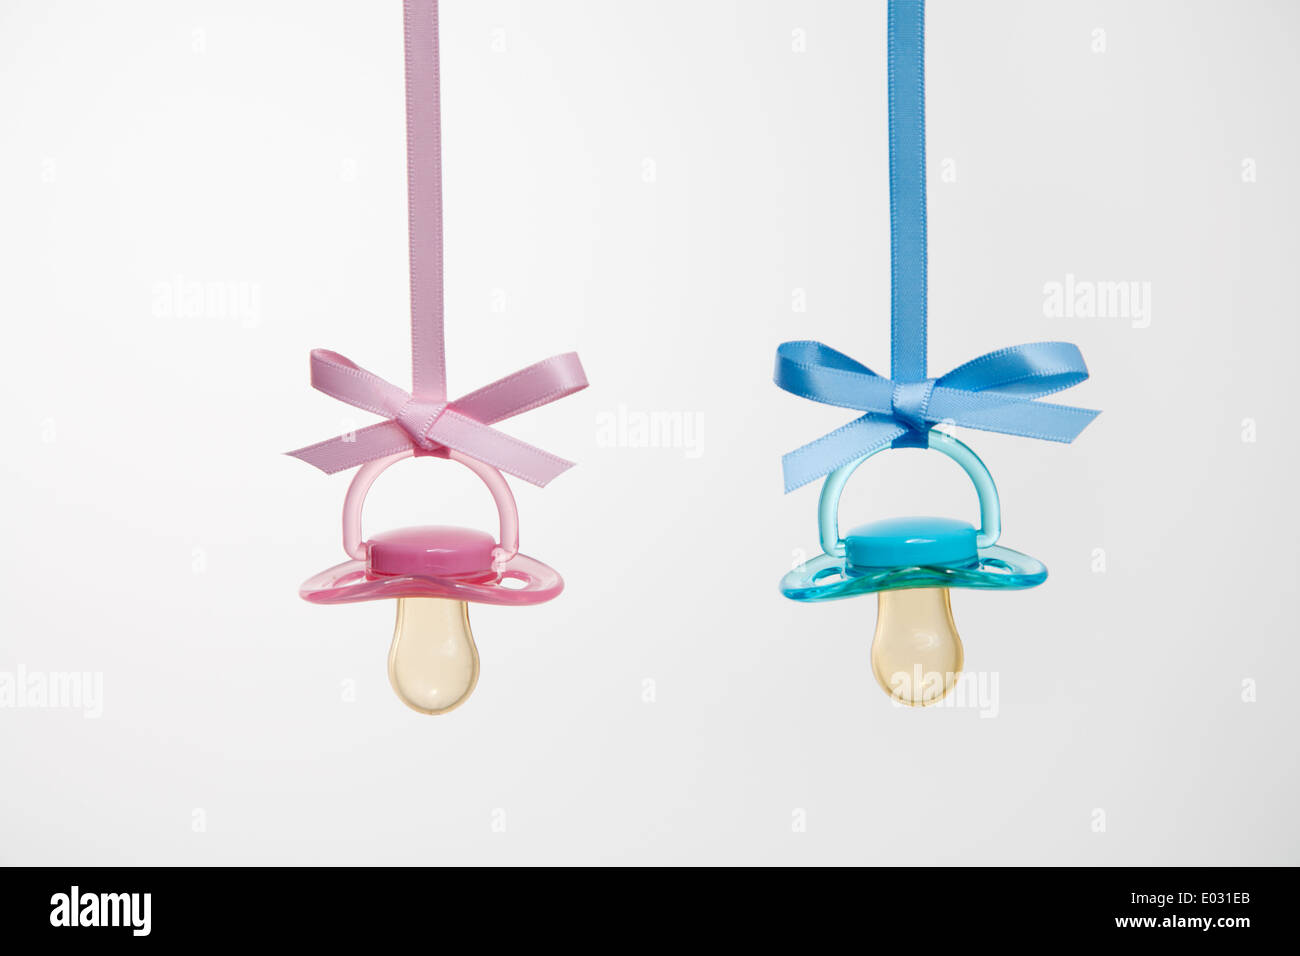 Baby pacifiers hanging from ribbons against a plain background. Stock Photo